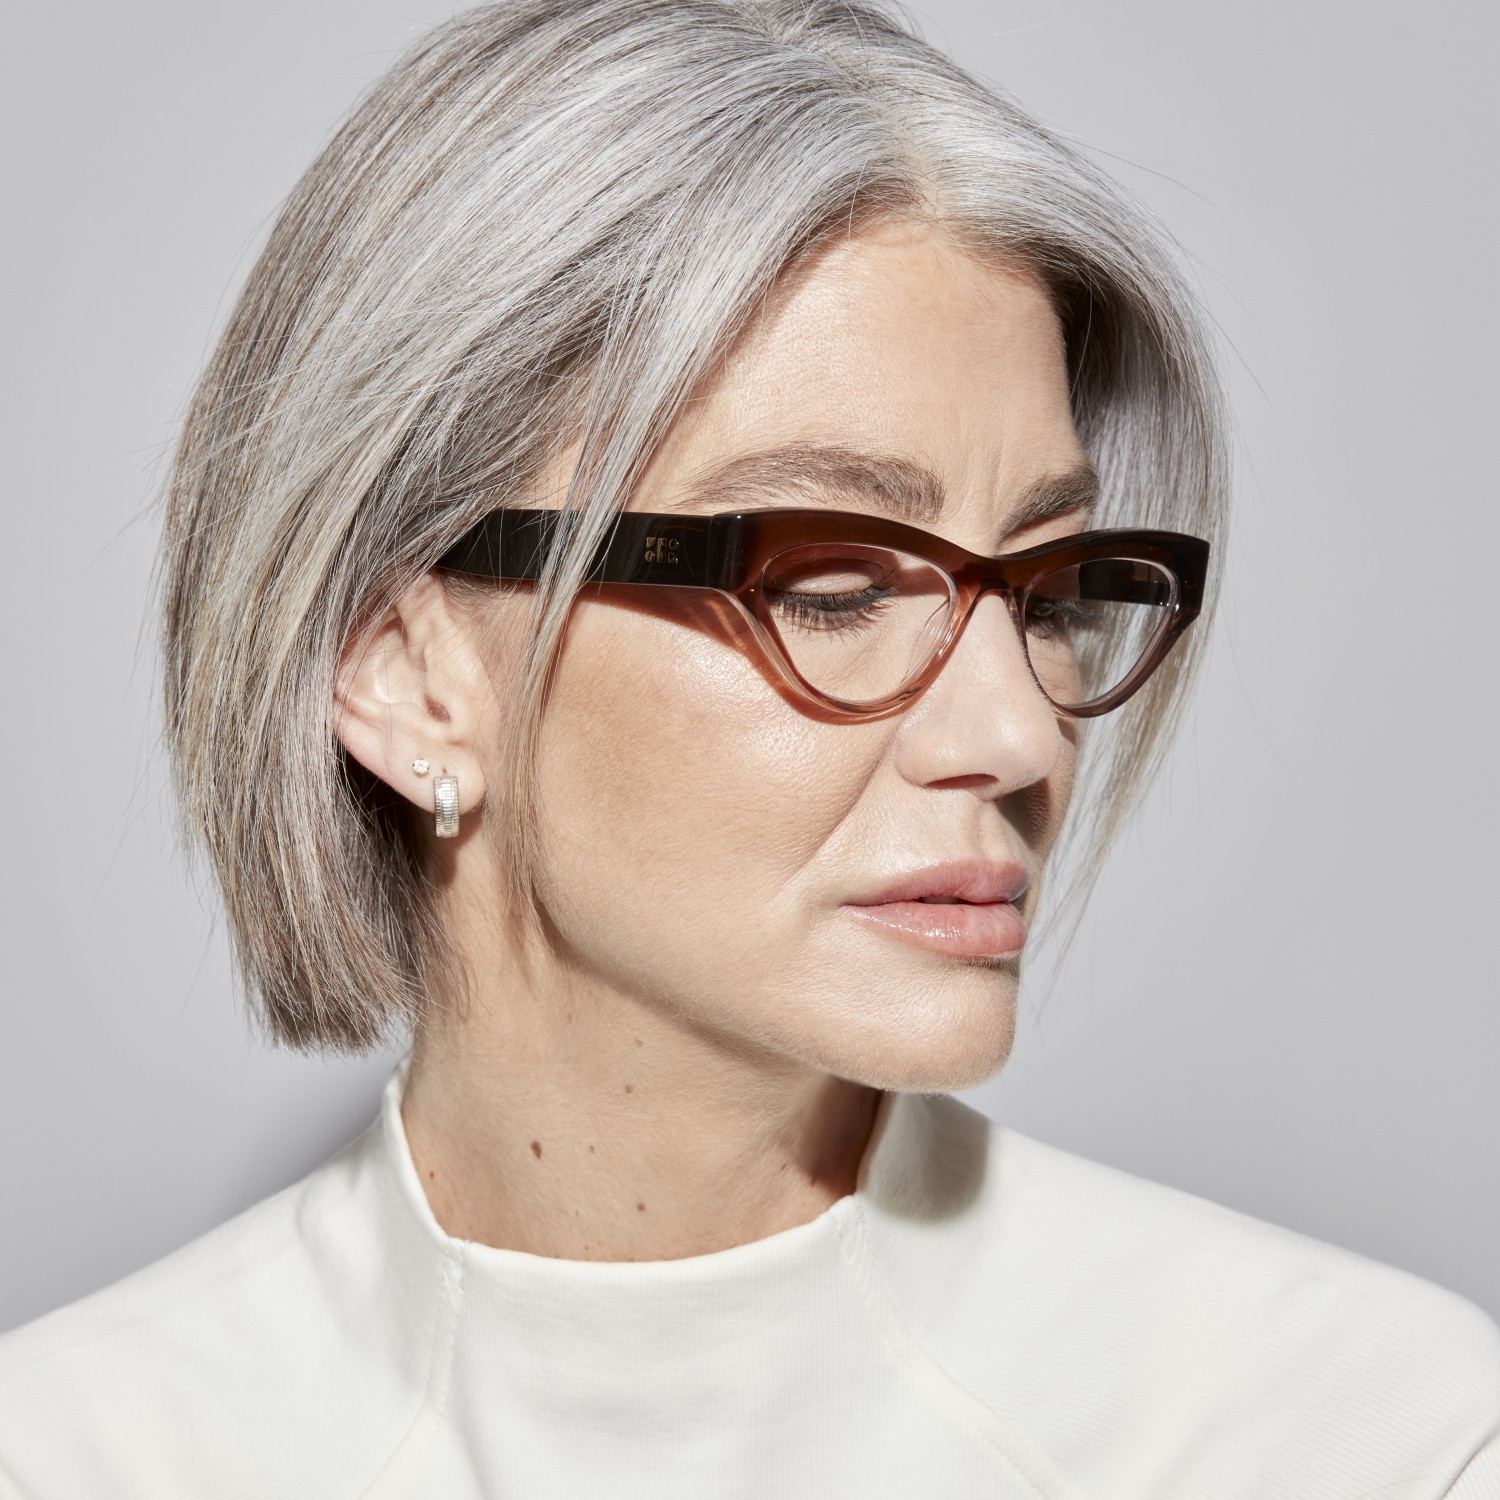 Photo of a man or woman wearing Marion Gradient Grey Reading Glasses by French Kiwis